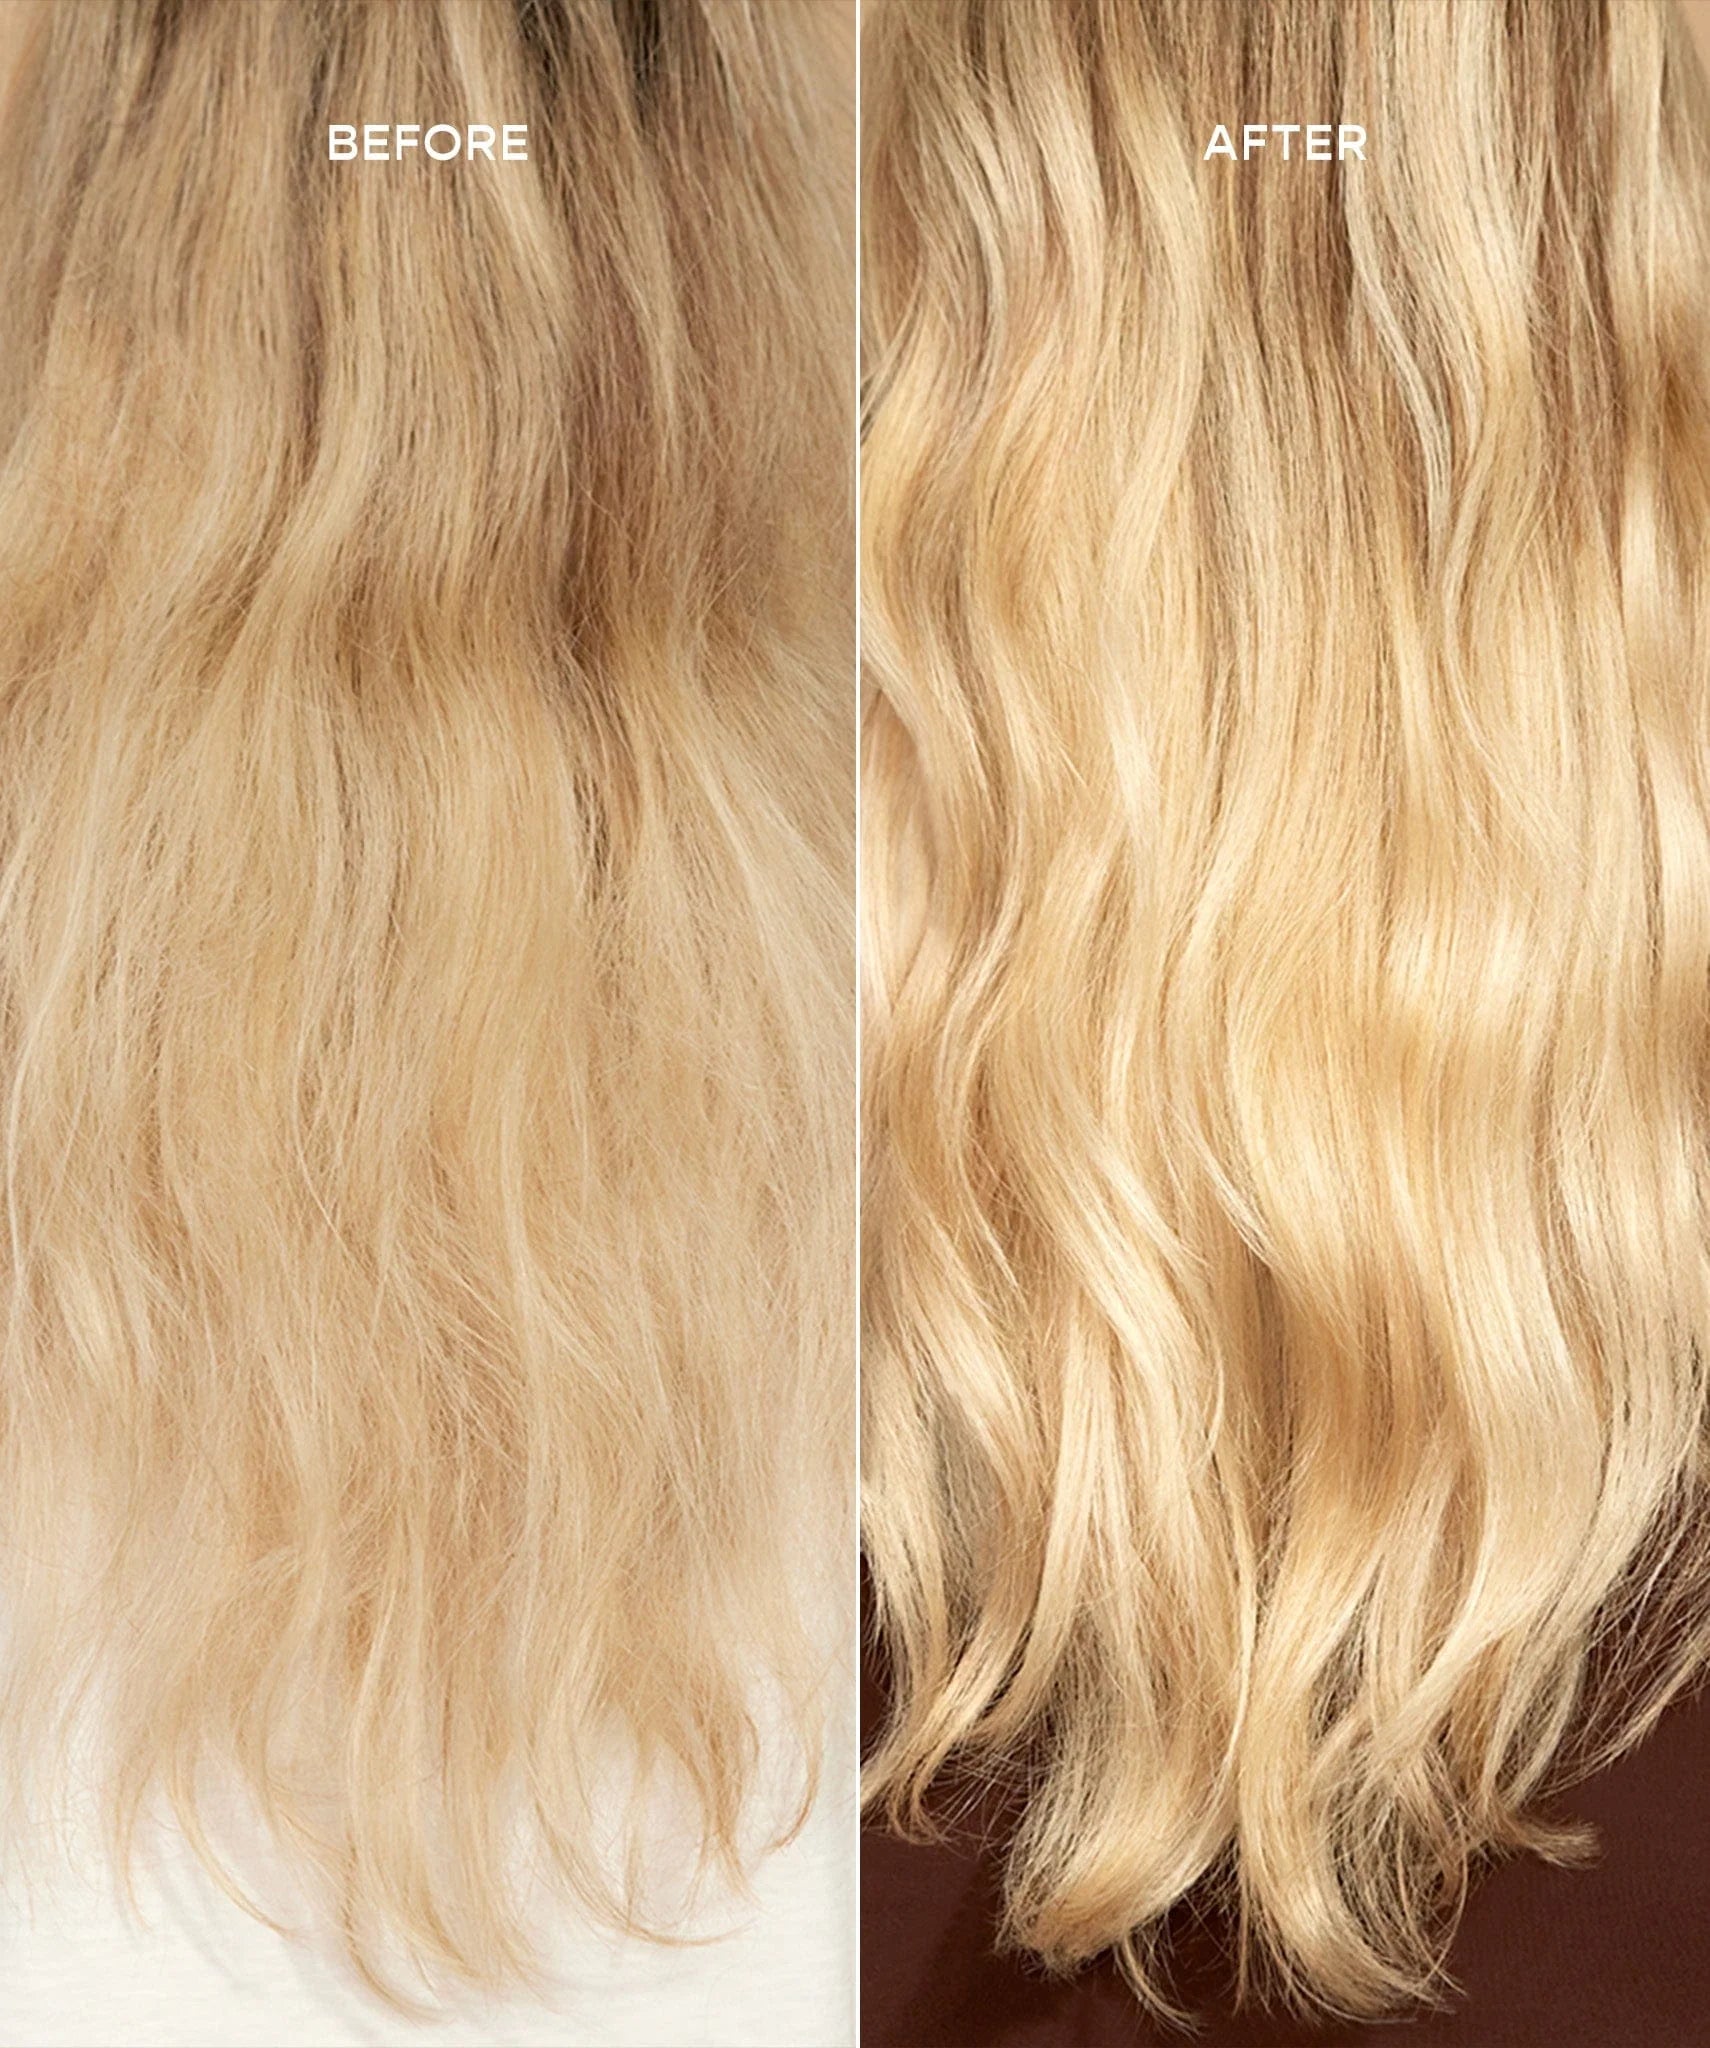 HYDR-8 Leave-In Conditioner Before & After